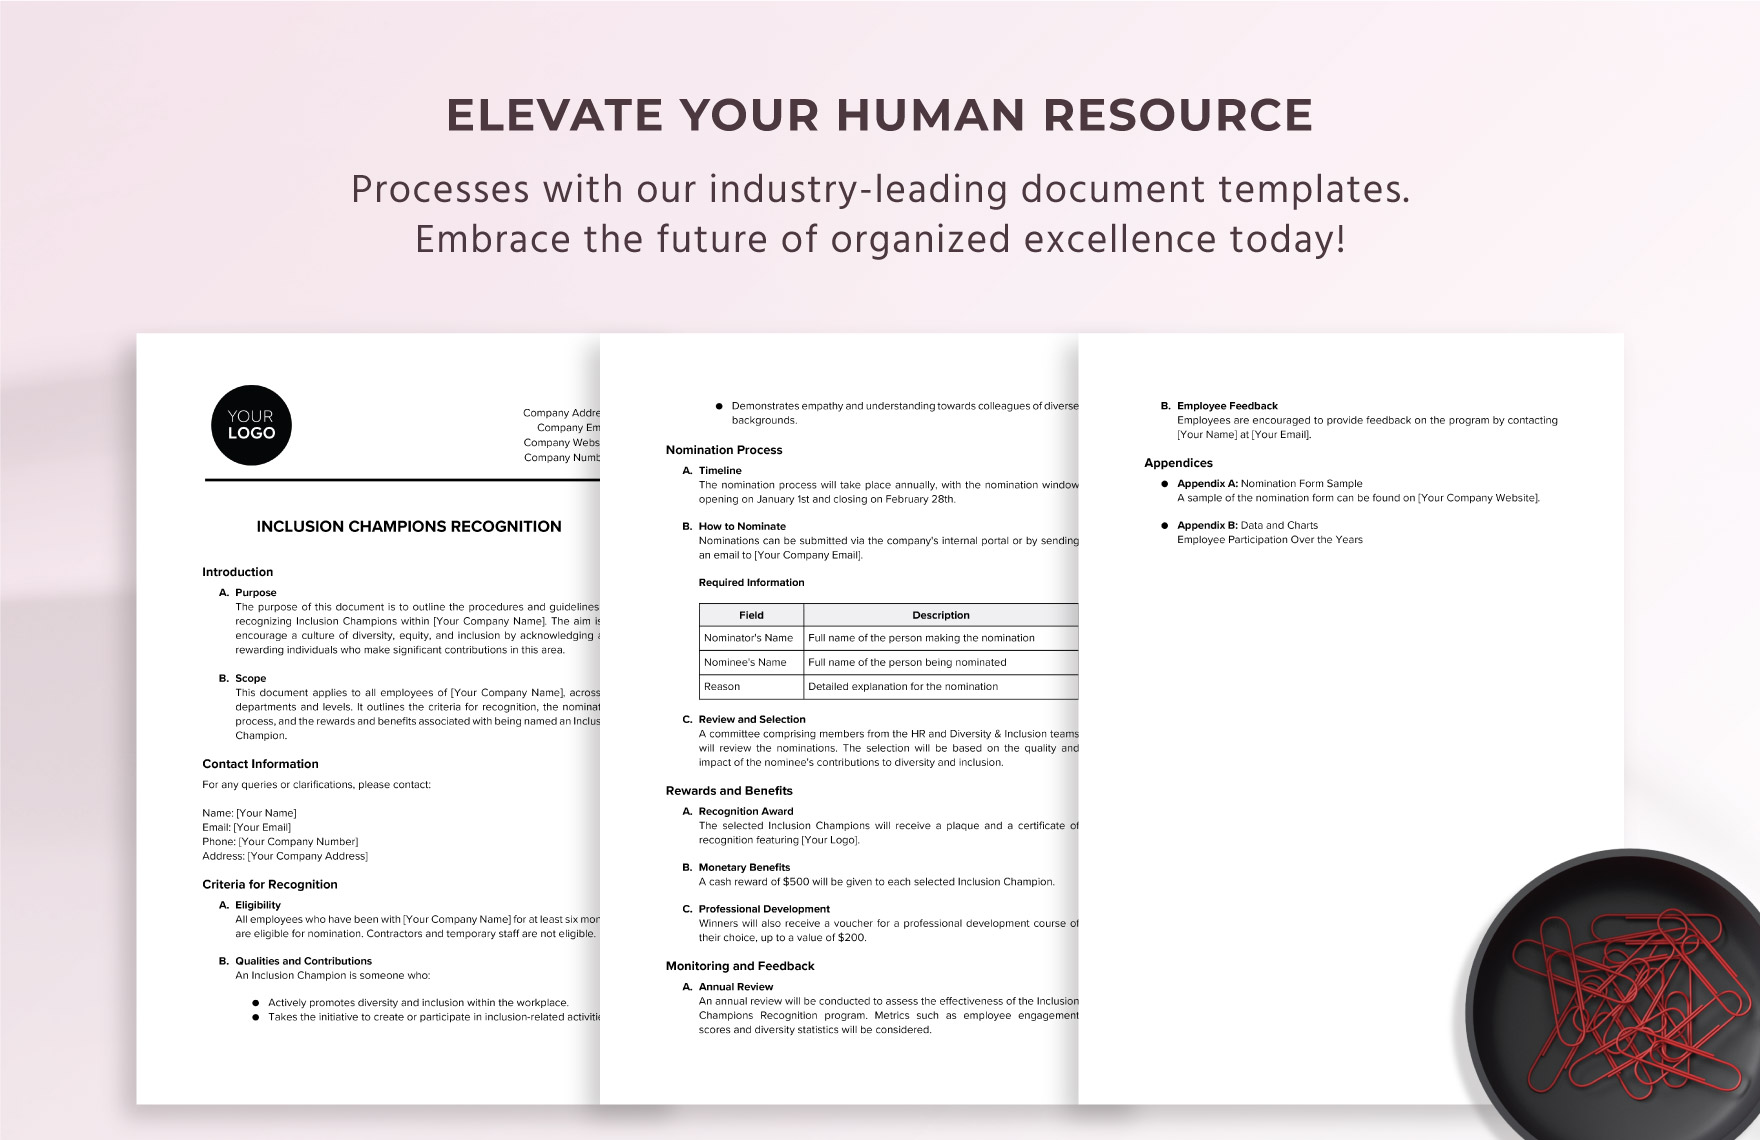 Inclusion Champions Recognition HR Template